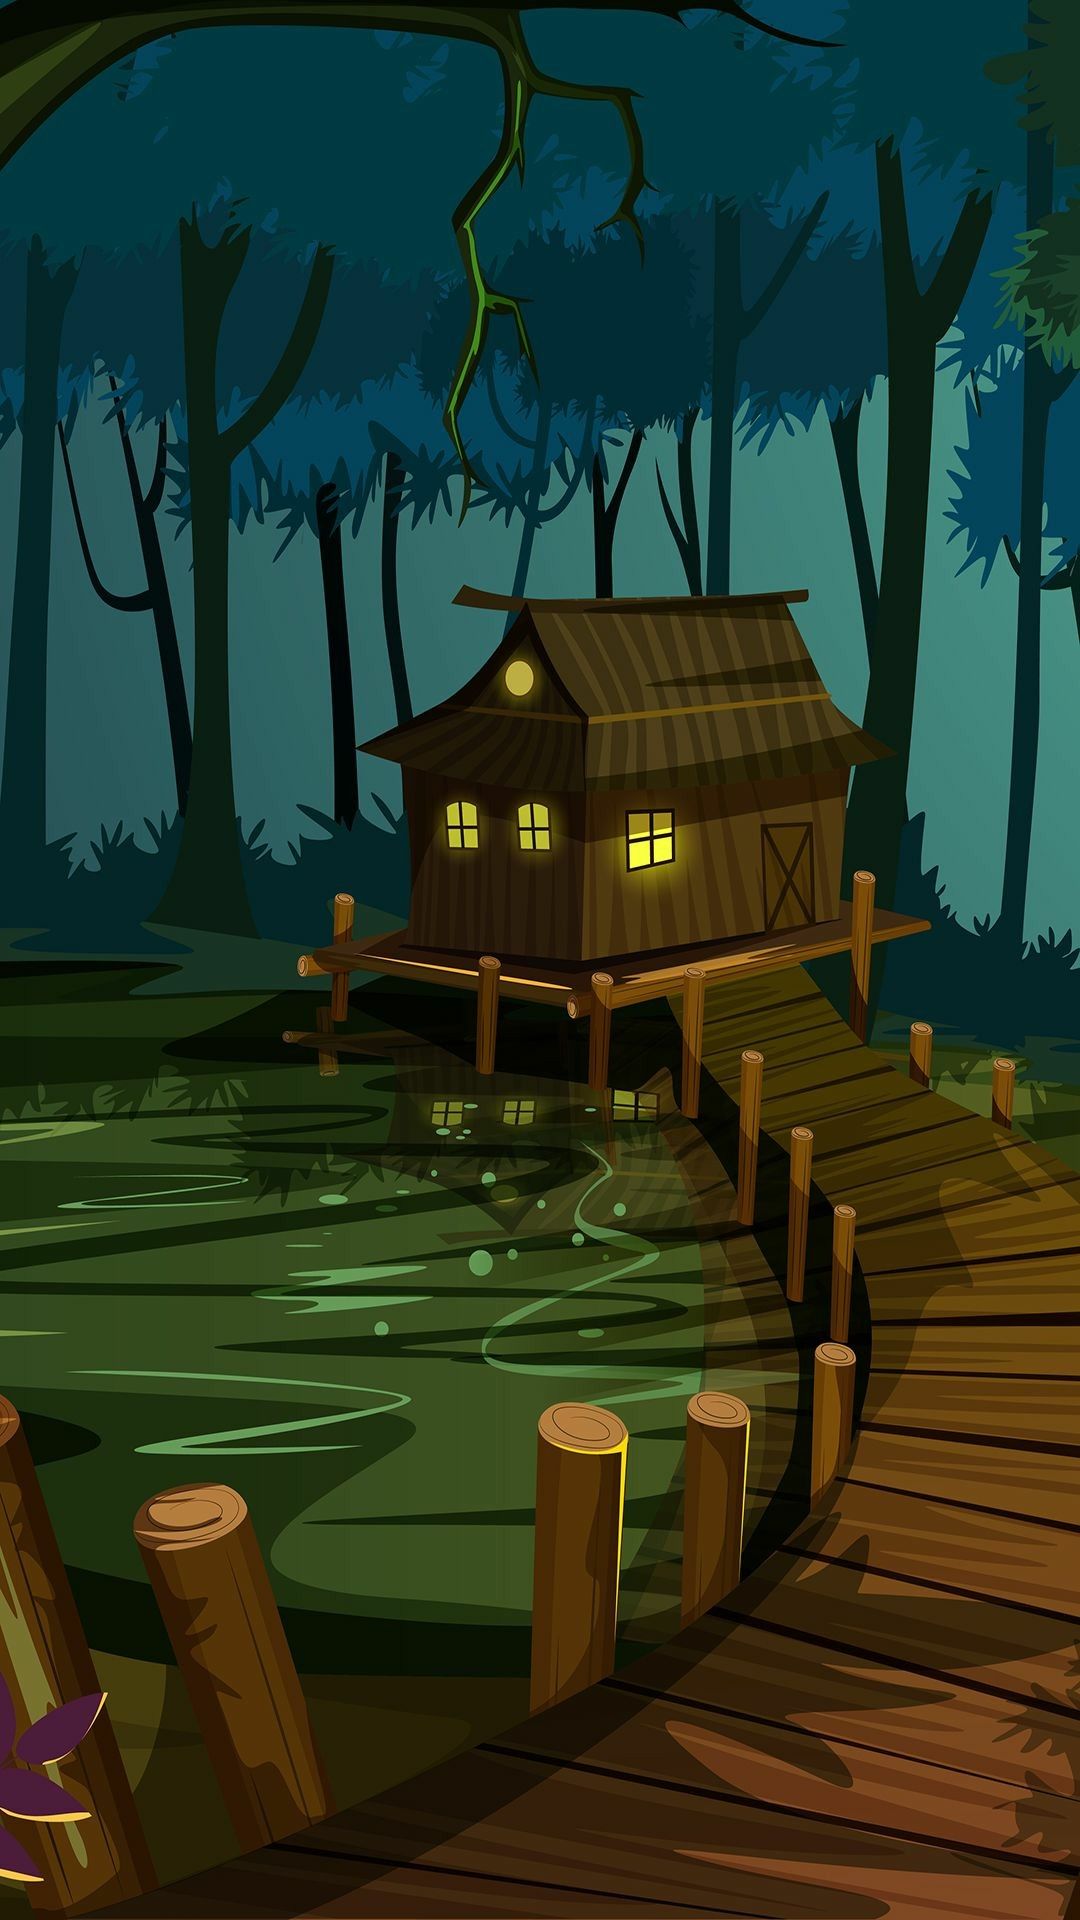 Shack In The Swamp Bayou House Cartoon Forest And With A